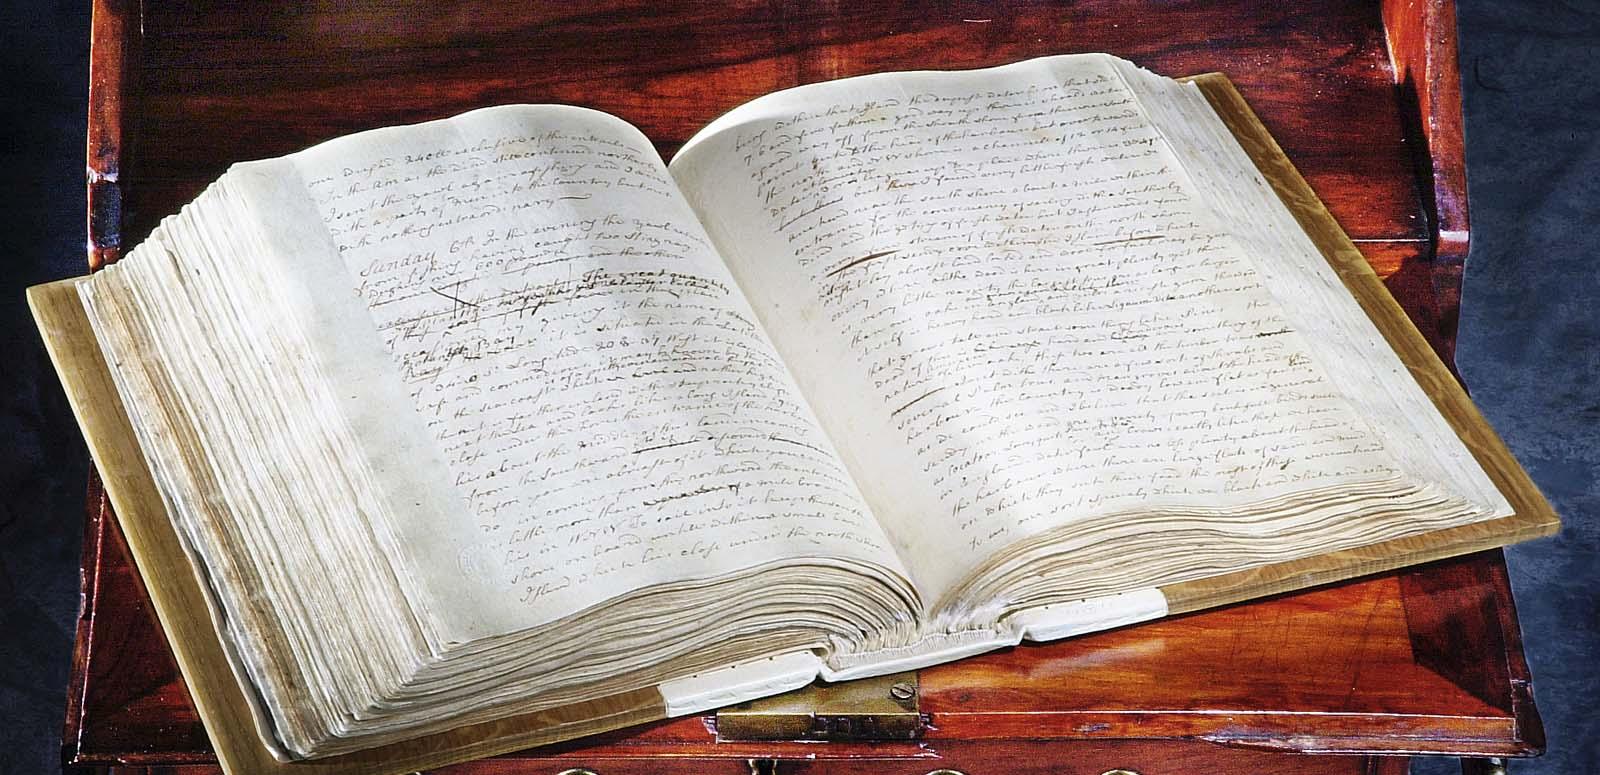 The hardback, handwritten journal of Lieutenant James Cook from 1770, lying open on a table